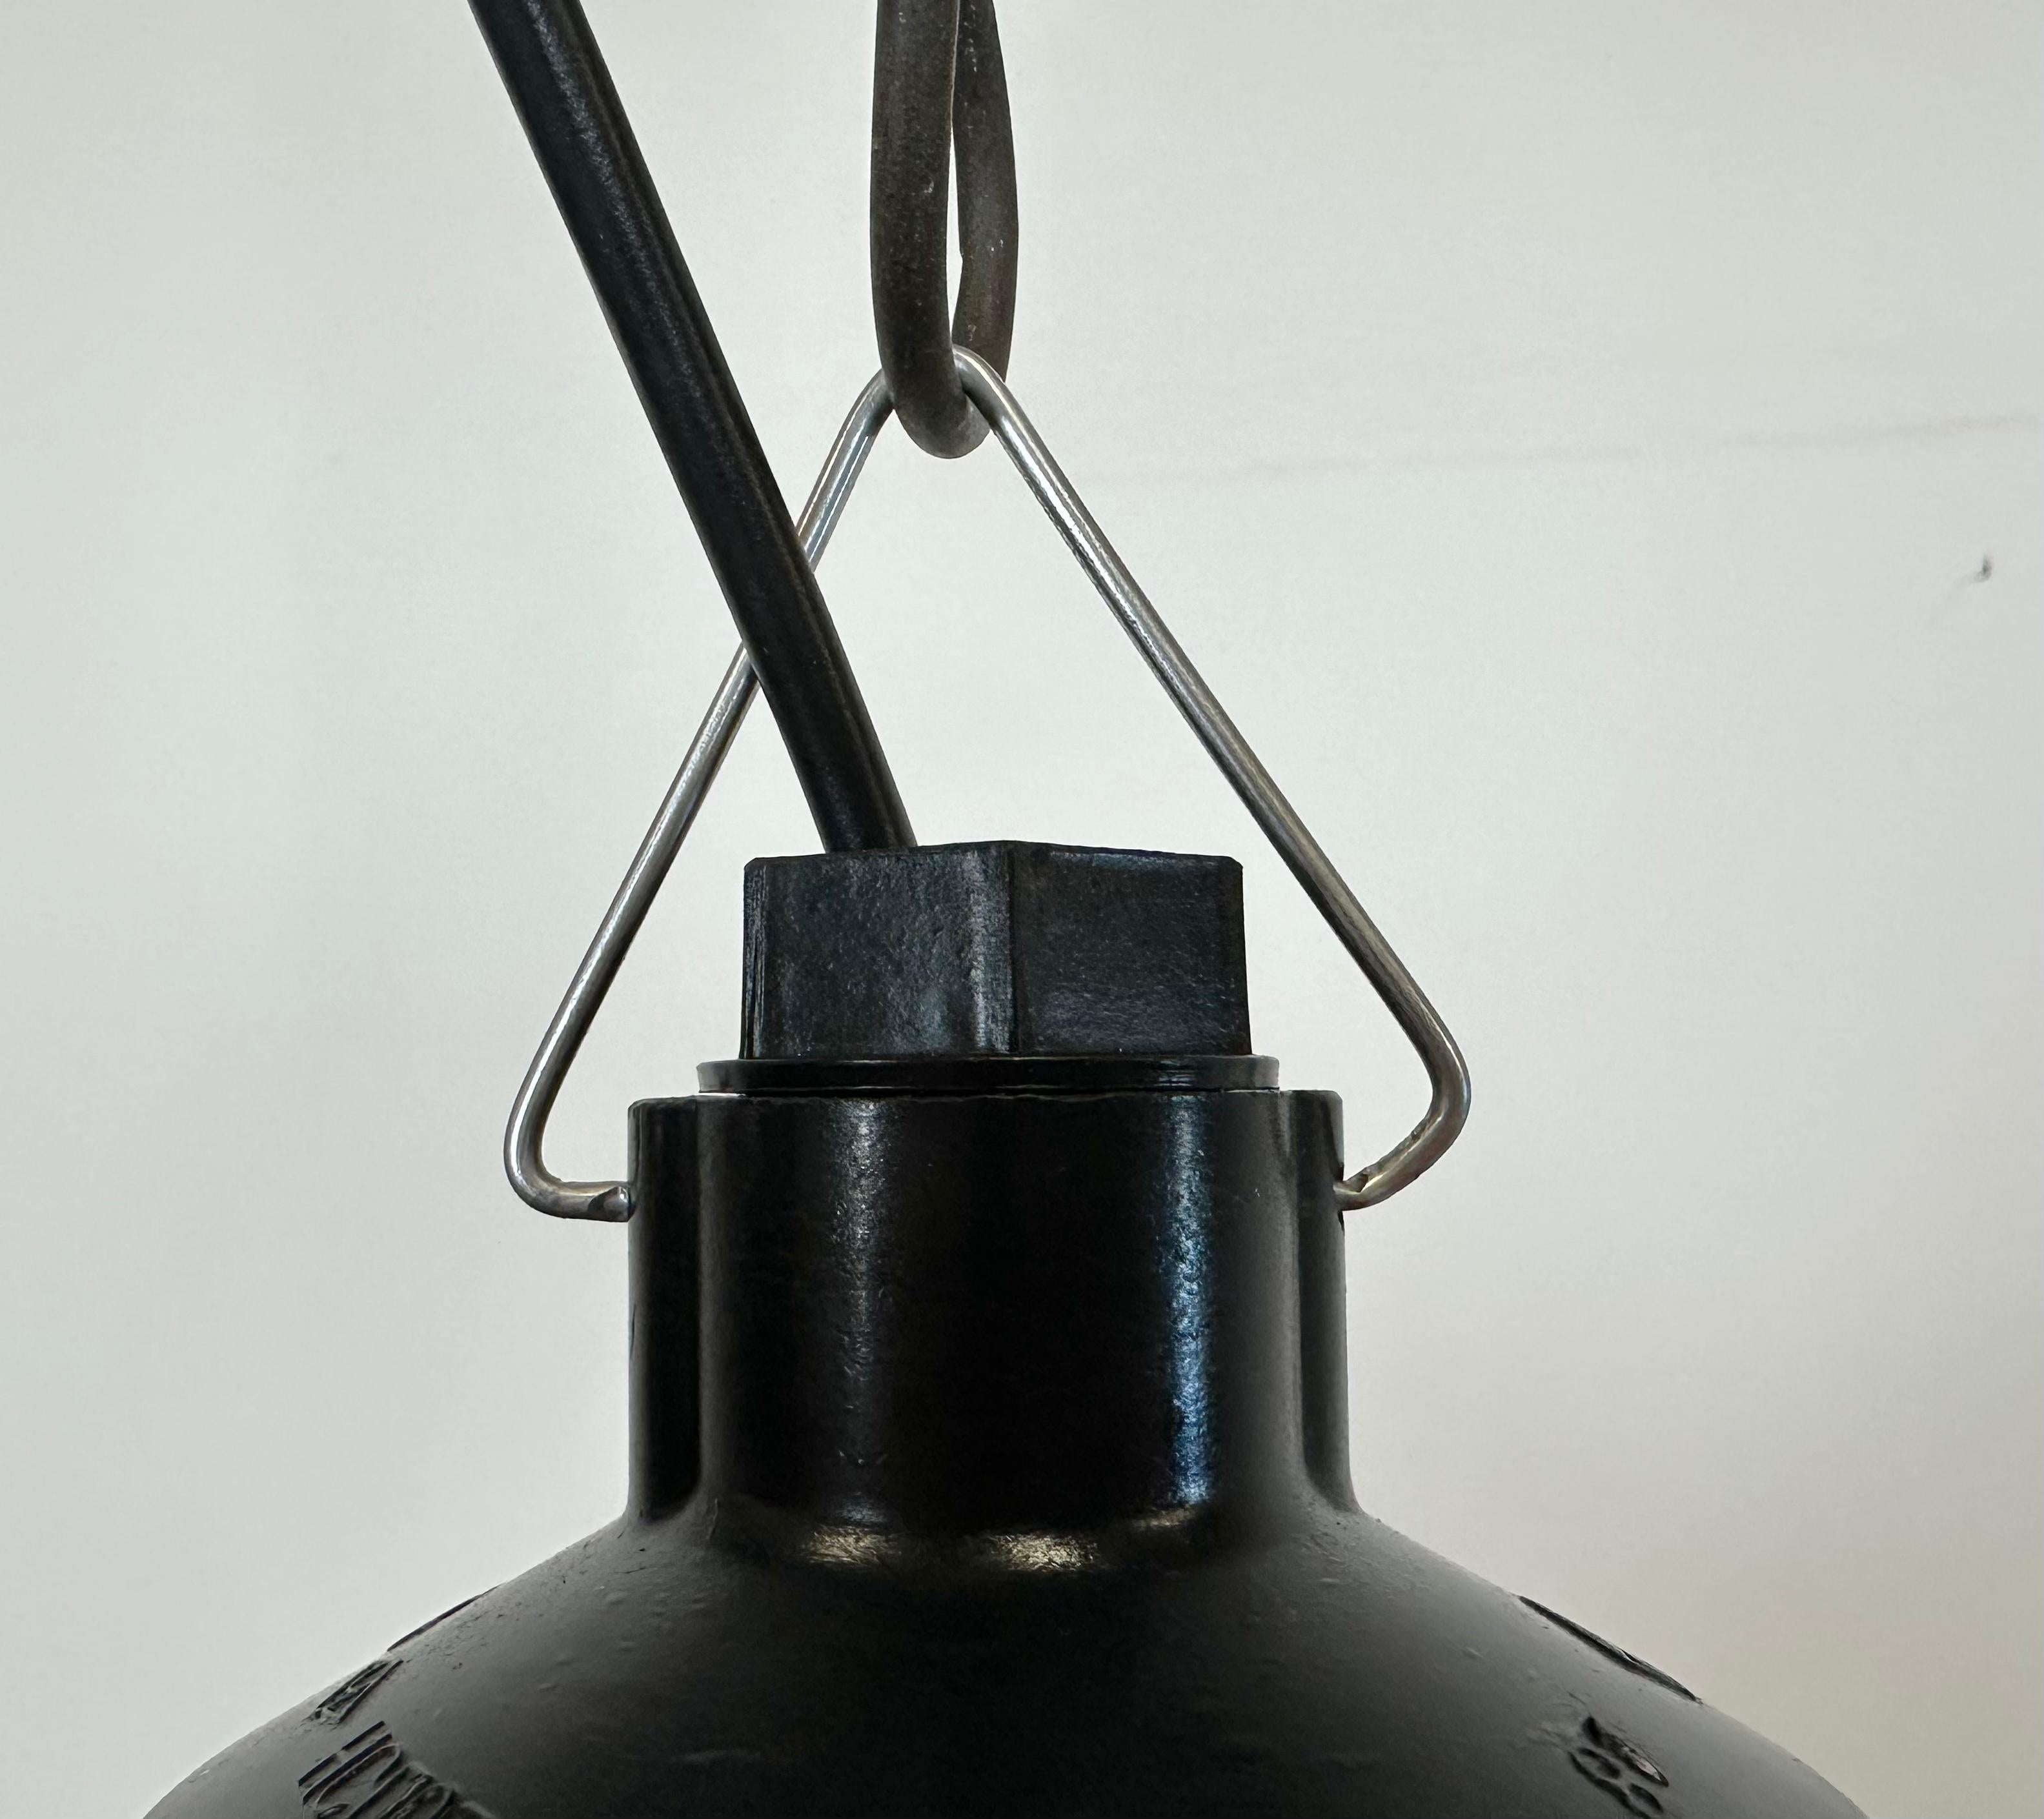 Industrial Bakelite Pendant Light with Frosted Glass, 1970s For Sale 1